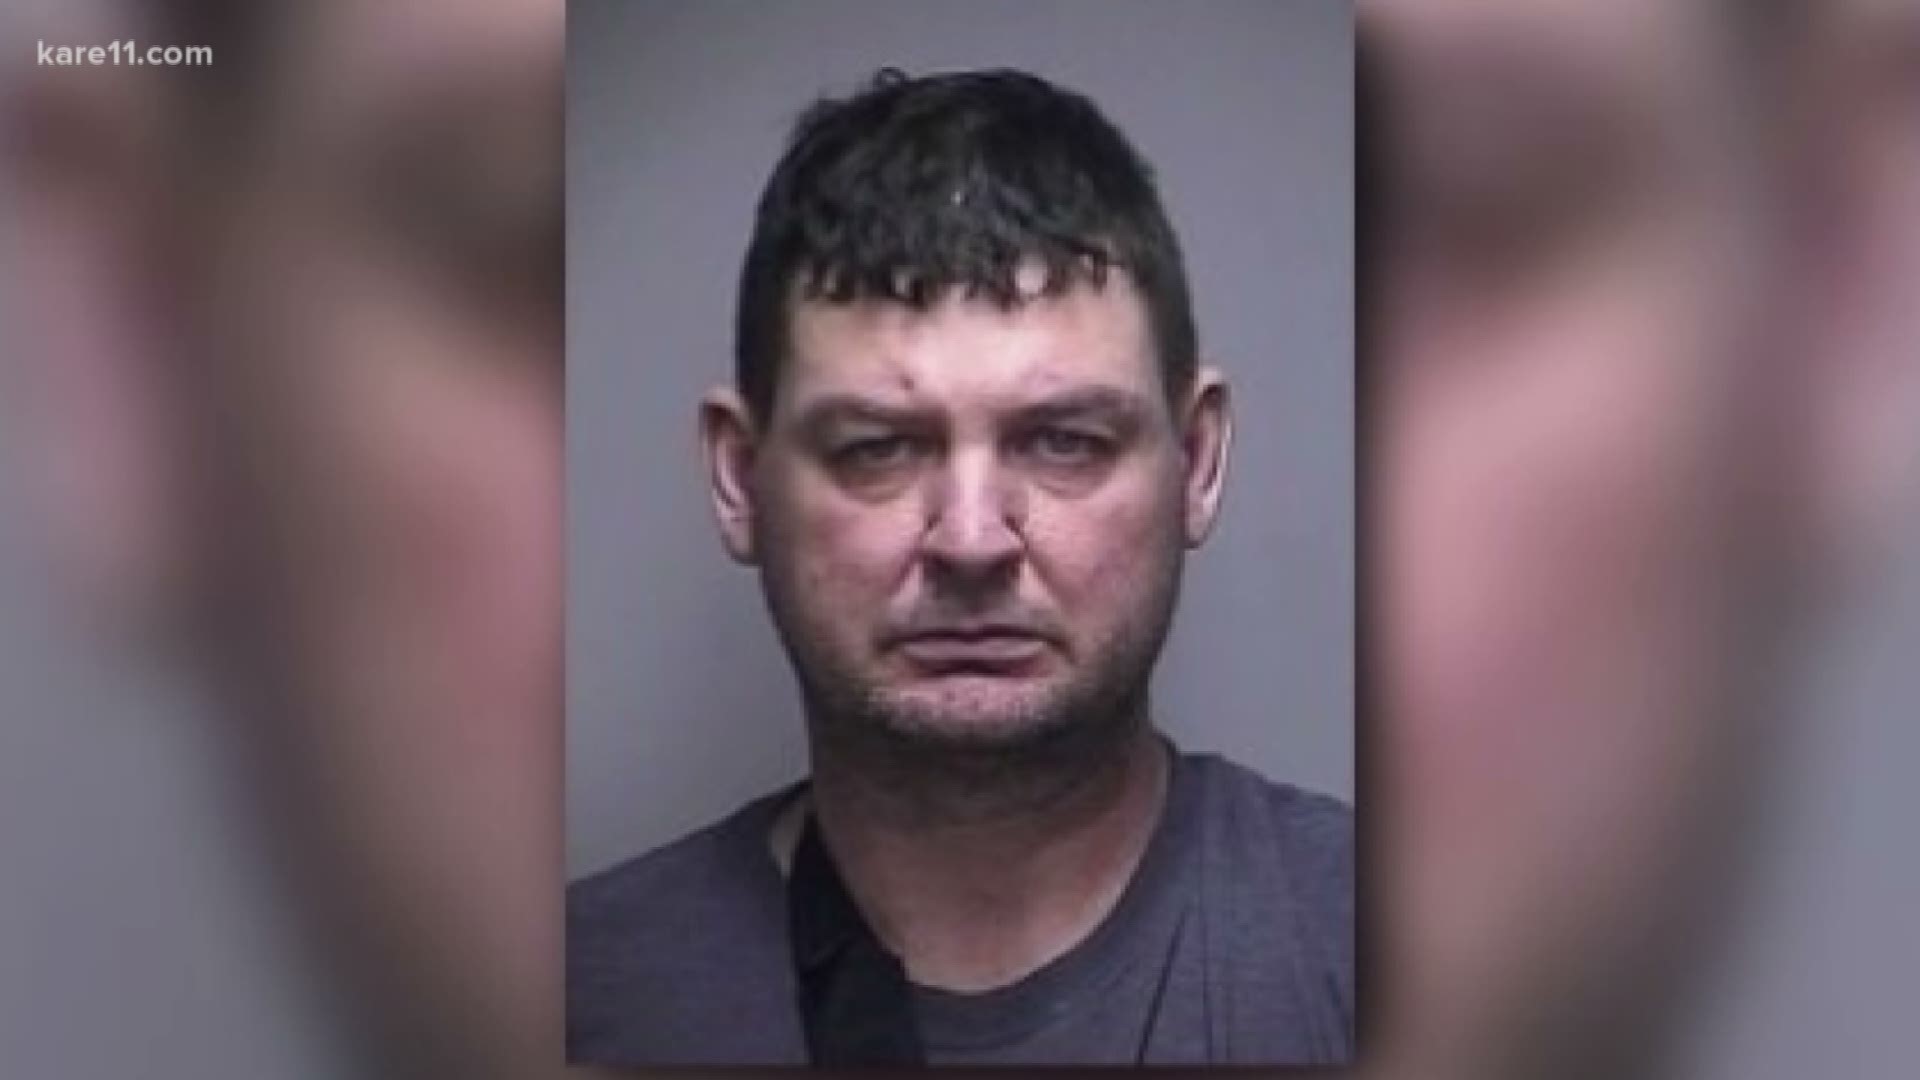 The snowmobile driver, 45-year-old Eric Coleman, was indicted in March after Alan Geisenkoetter, Jr. later died of his injuries.